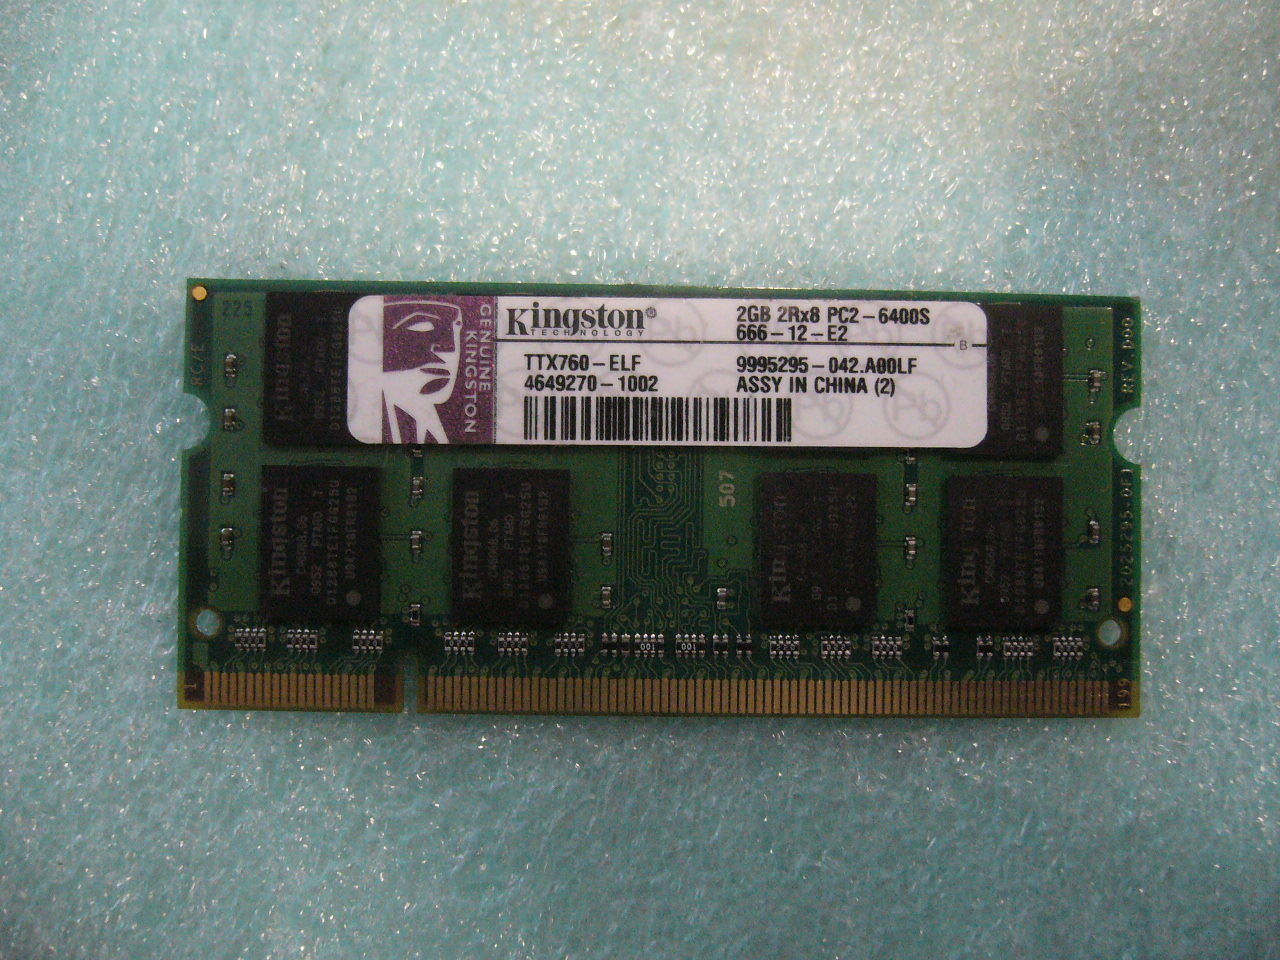 QTY 1x 2GB Kingston DDR2 PC2-6400S 200-pins SO-DIMM for laptop TTX760-ELF - Click Image to Close